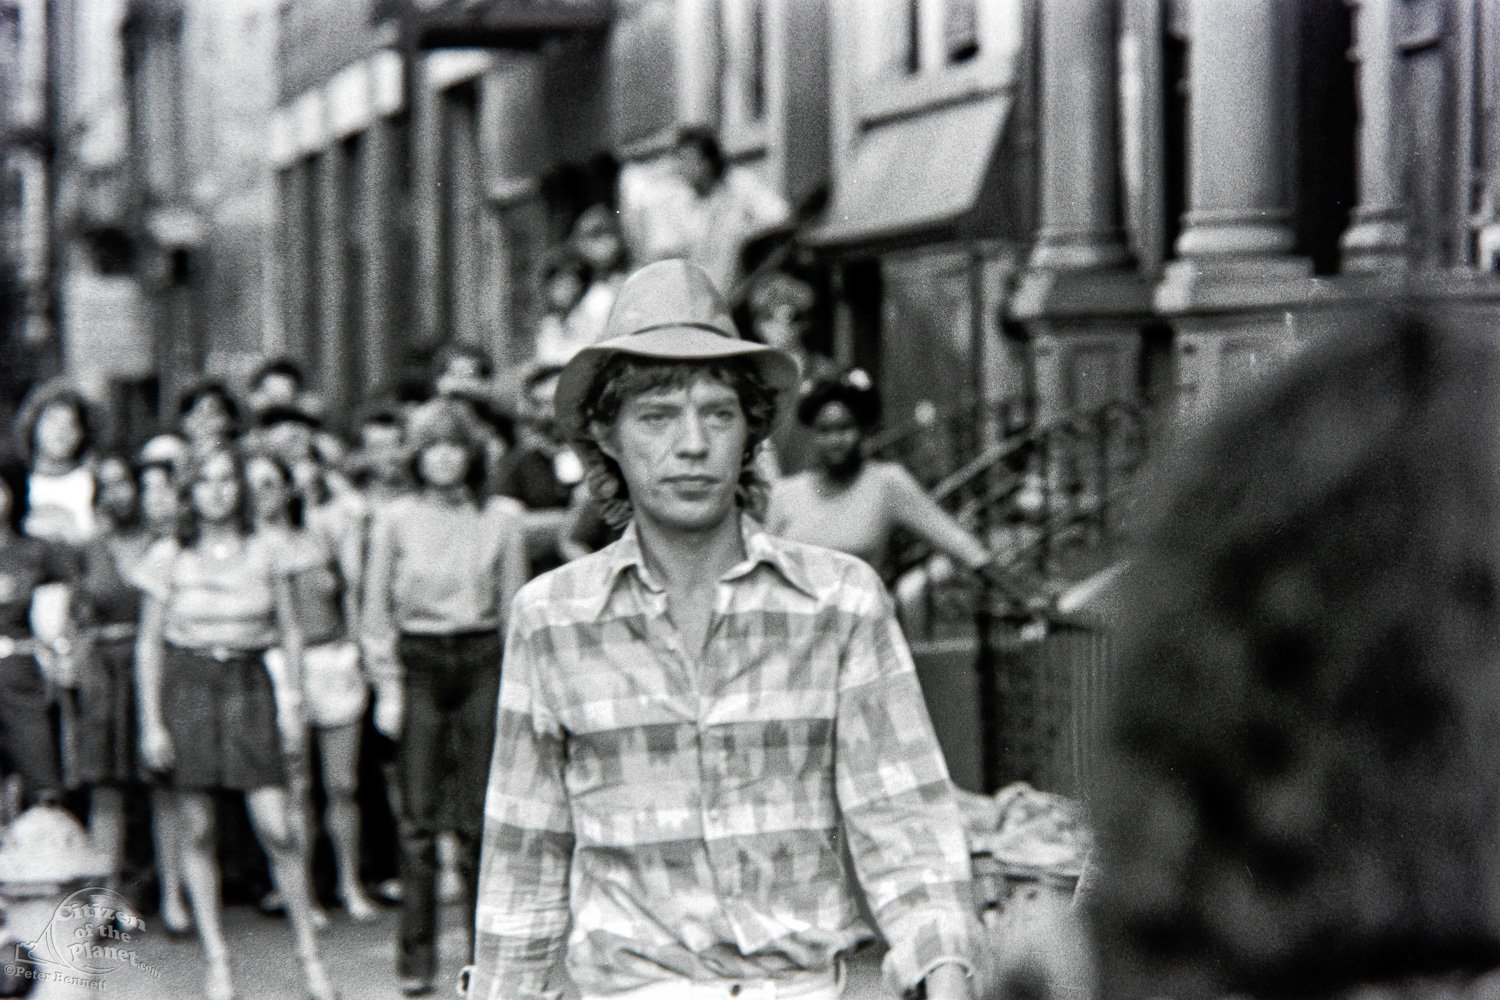  Mick Jagger filming Waiting on a Friend video, St Marks Place 